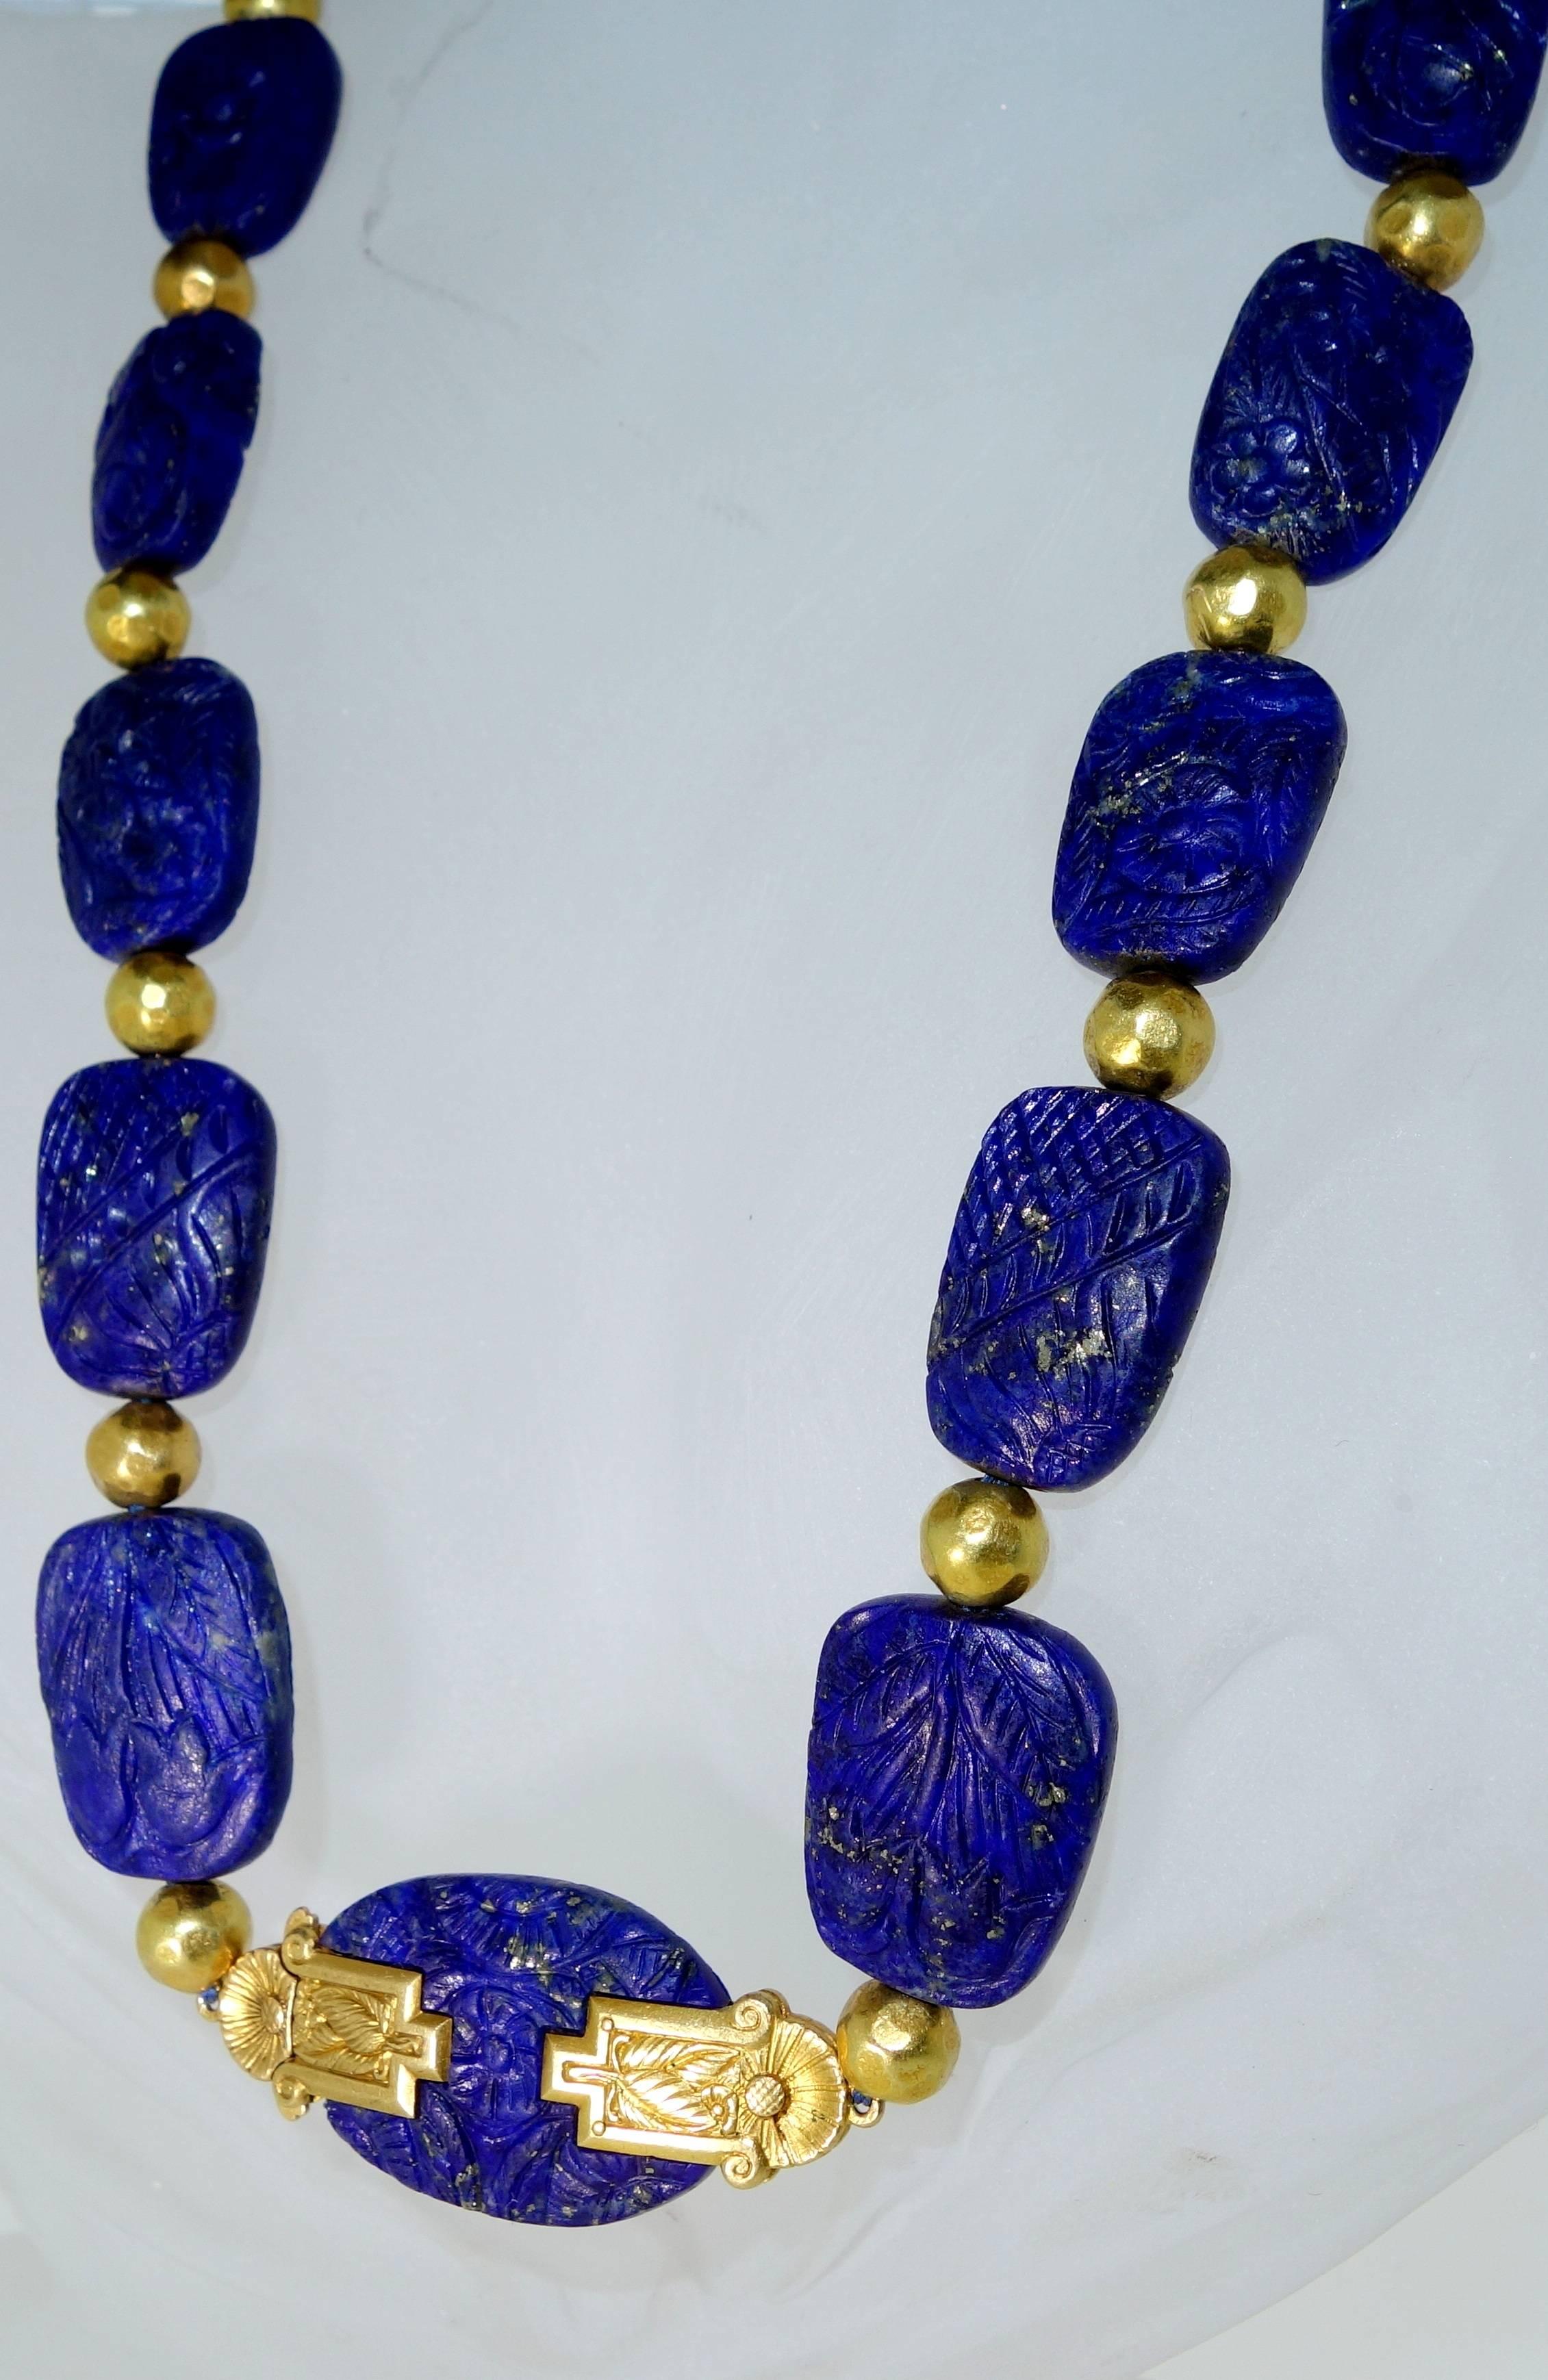 Seventeen finely carved - on both sides- lapis and interspersed with gold spheres that hand made and non-symetrical and terminating with an unusual finely carved gold clasp/center piece.  The lapis is a very bright blue with gold specks.  The